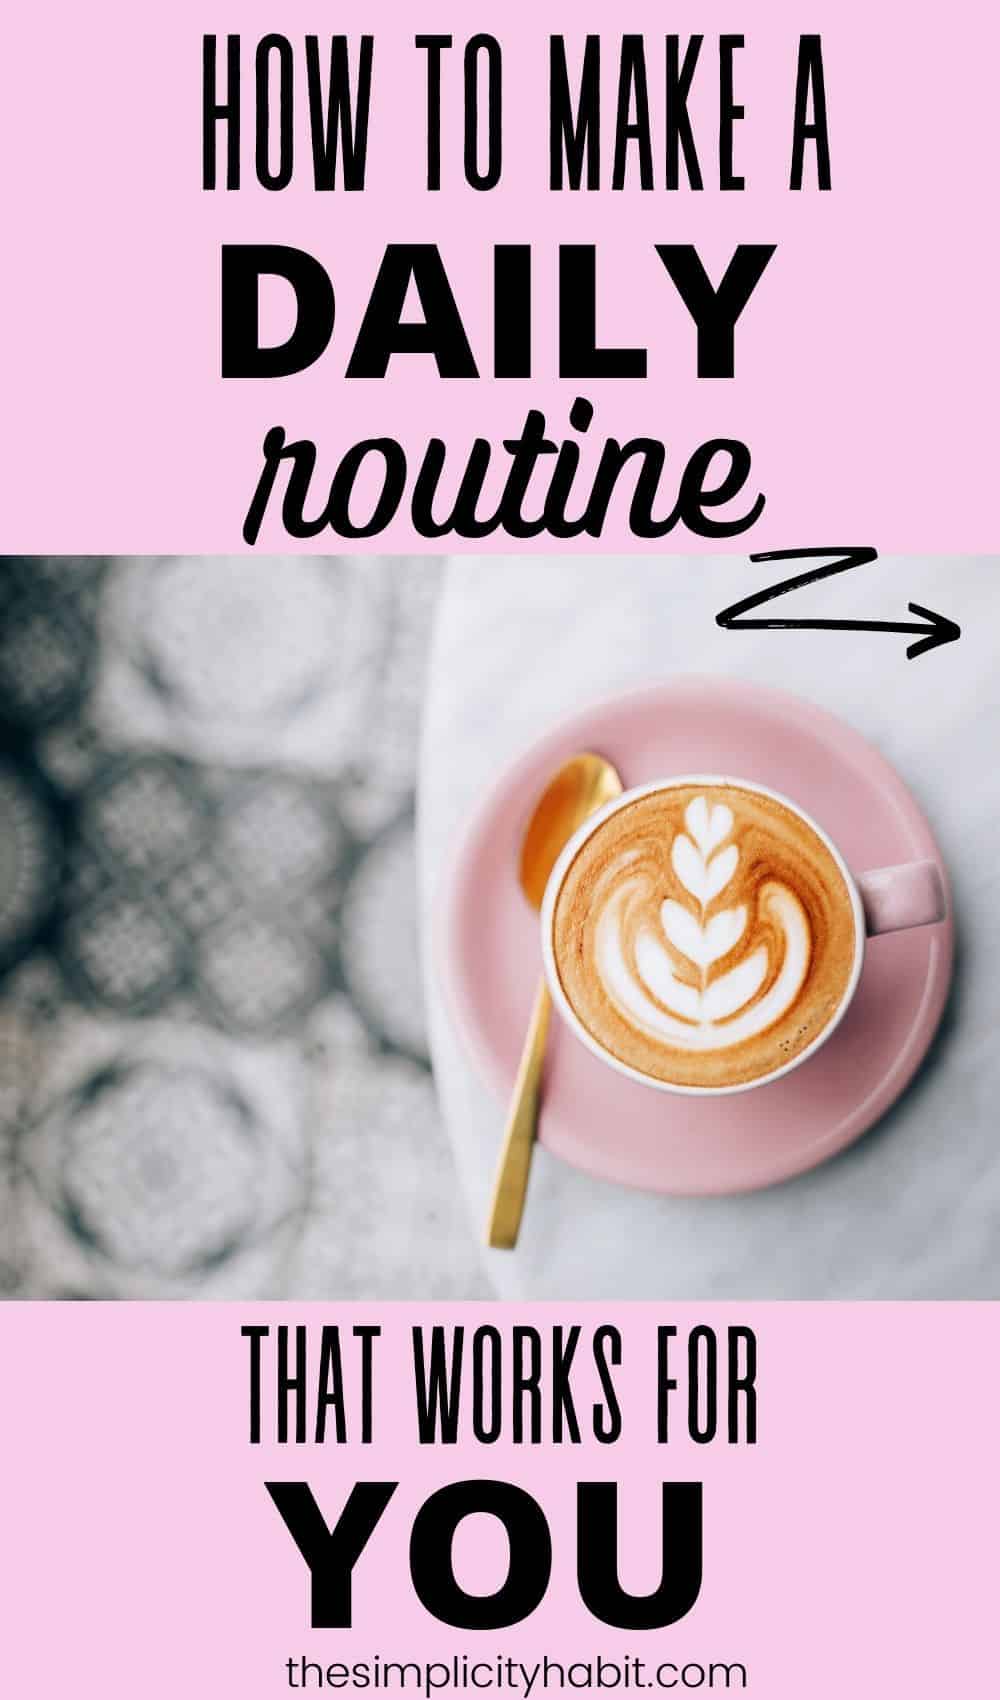 how-to-make-a-daily-routine-for-yourself-why-you-should-stick-to-a